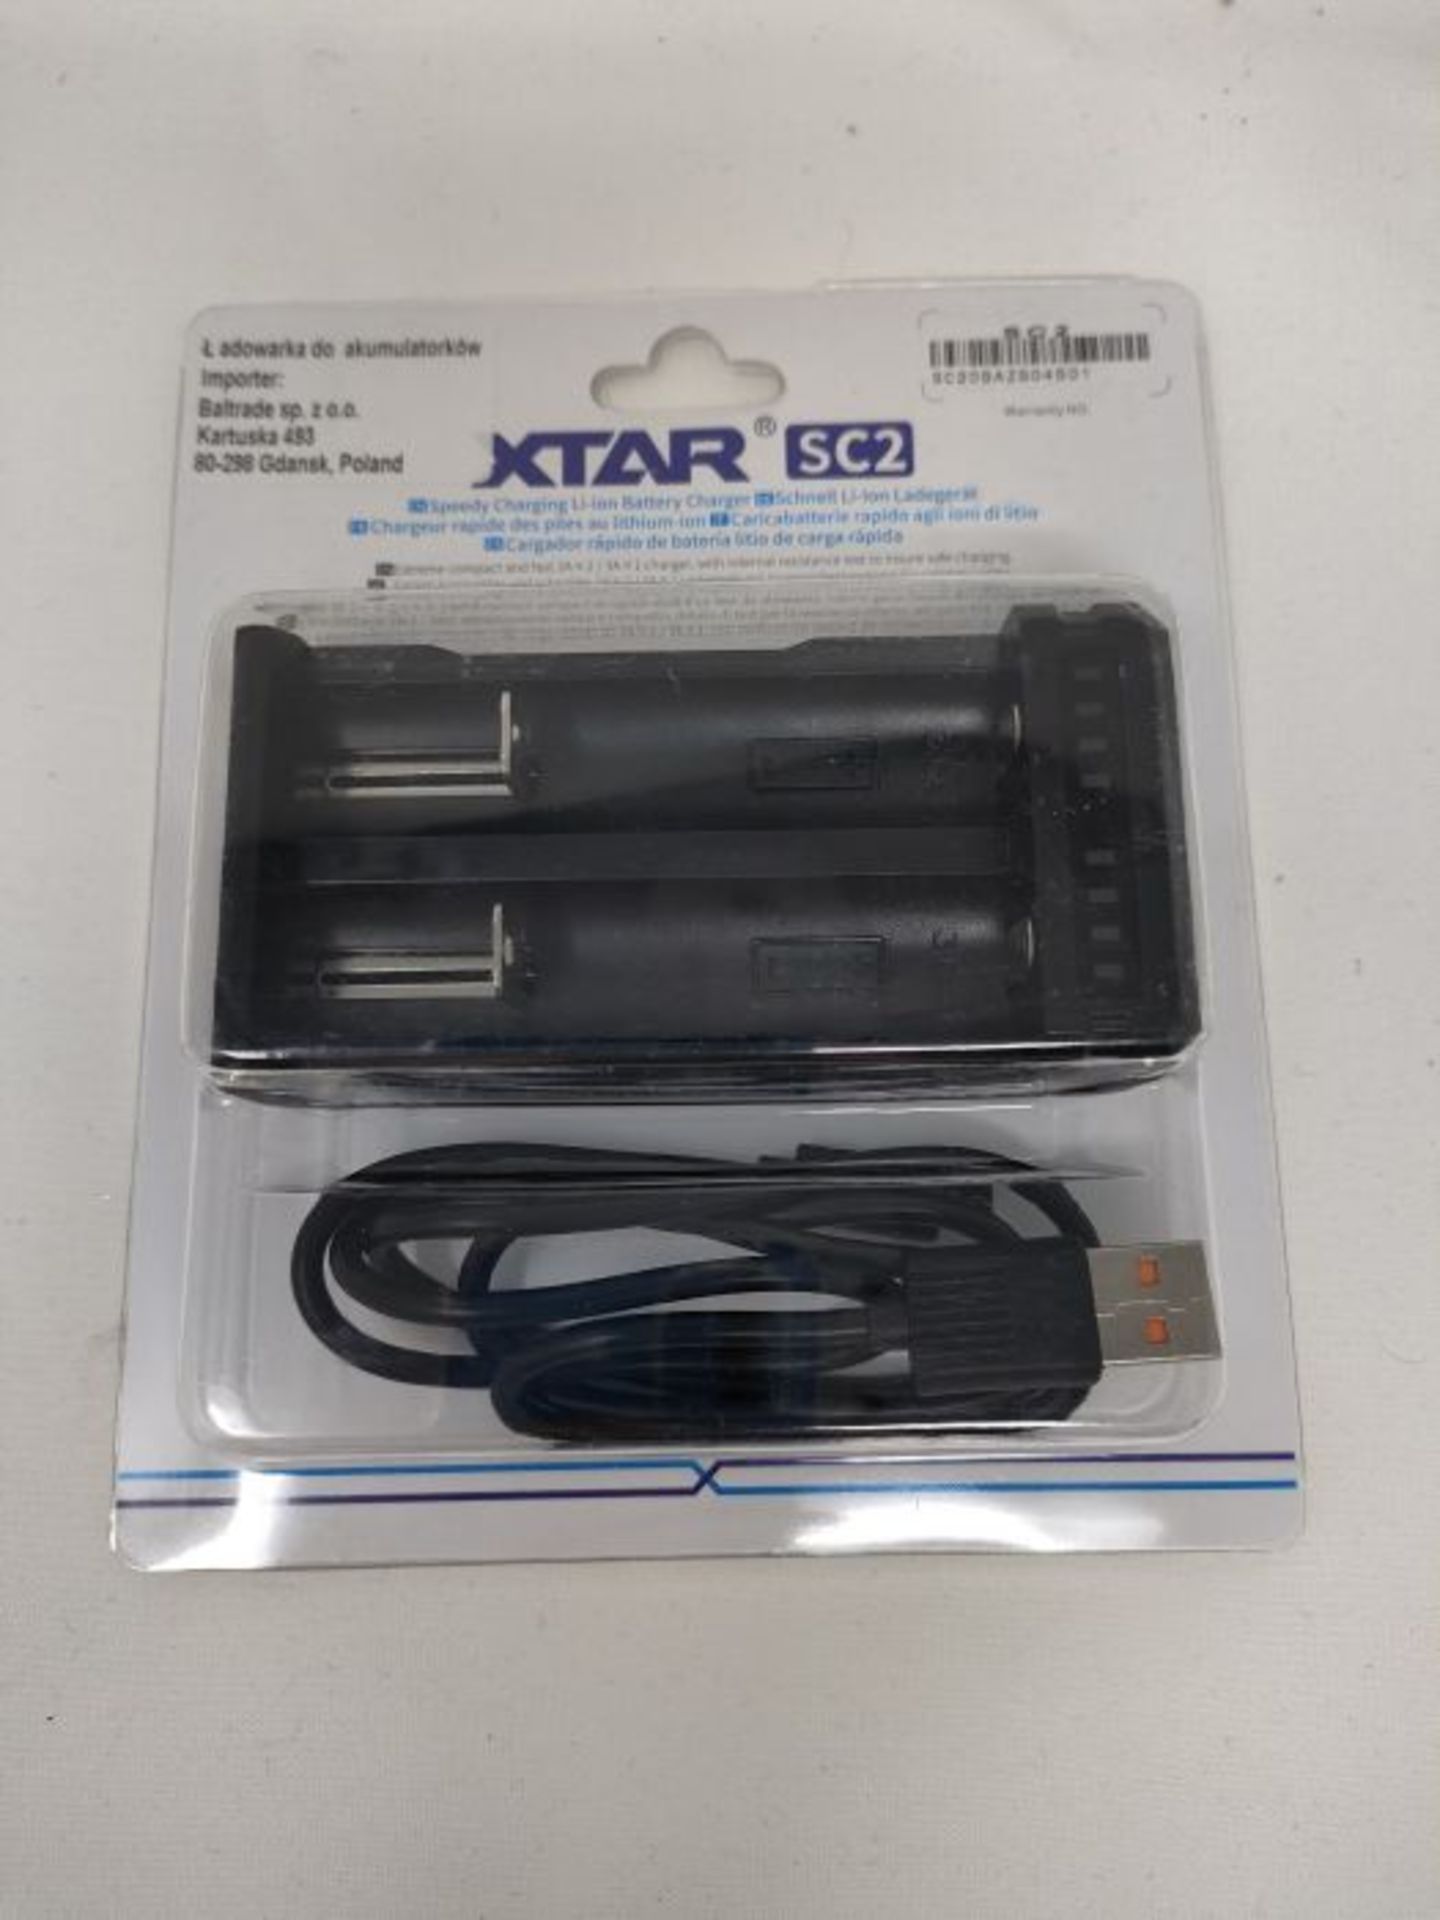 XTAR Unisex - Adult's Charger for Li-ion Batteries Professional and Fast Reactivation - Image 2 of 3